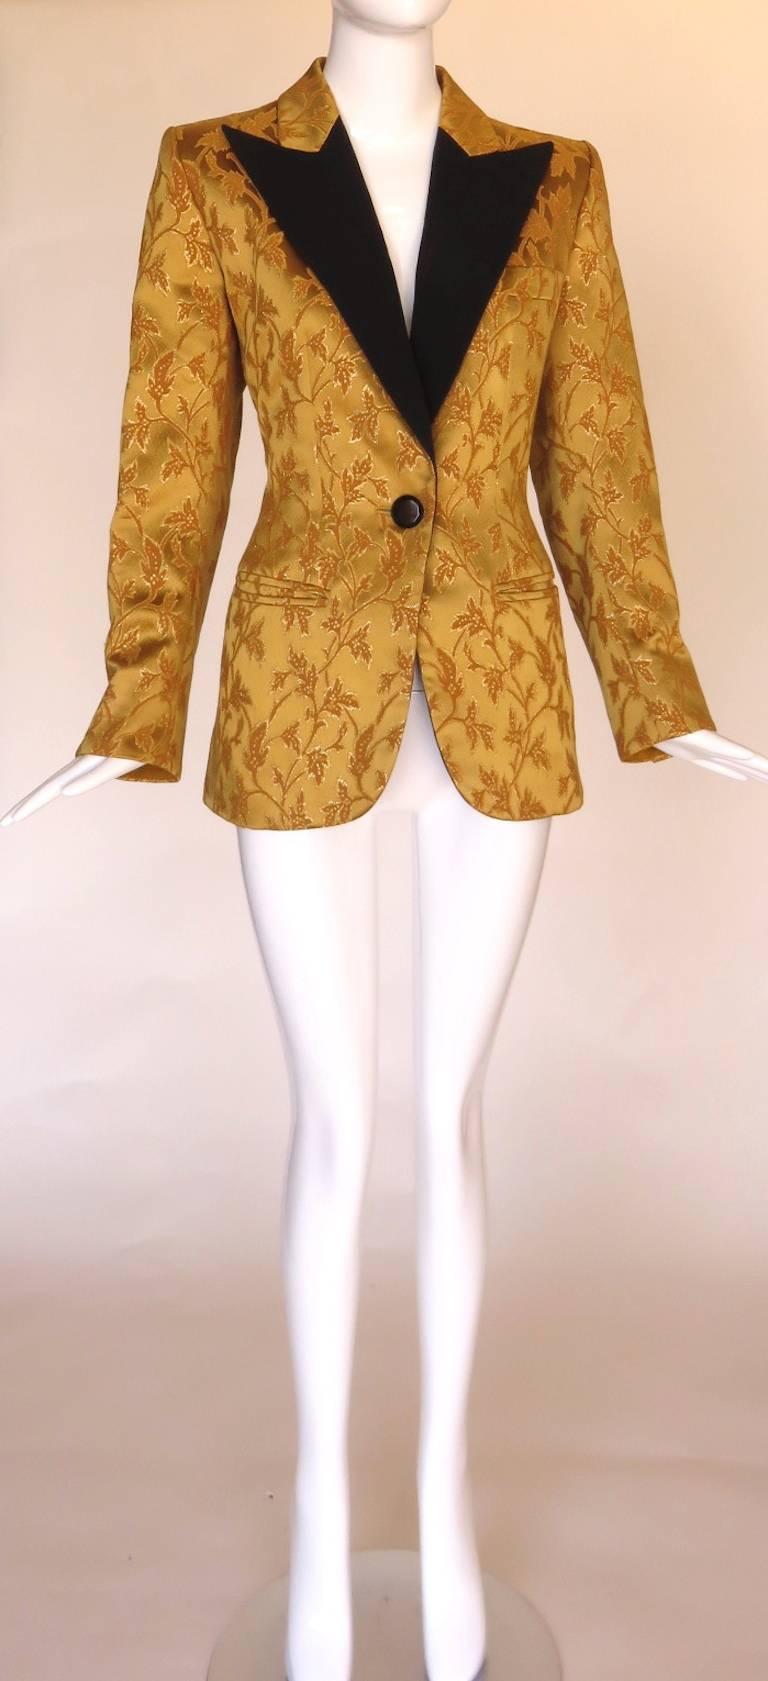 1990's YVES SAINT LAURENT Rive Gauche women's, golden brocade tuxedo jacket.

Golden, satin-face ground fabric with metallic, leaf jacquard patterning.

Contrast, black moire, peak lapels with black, onyx-style buttons.

Single button front